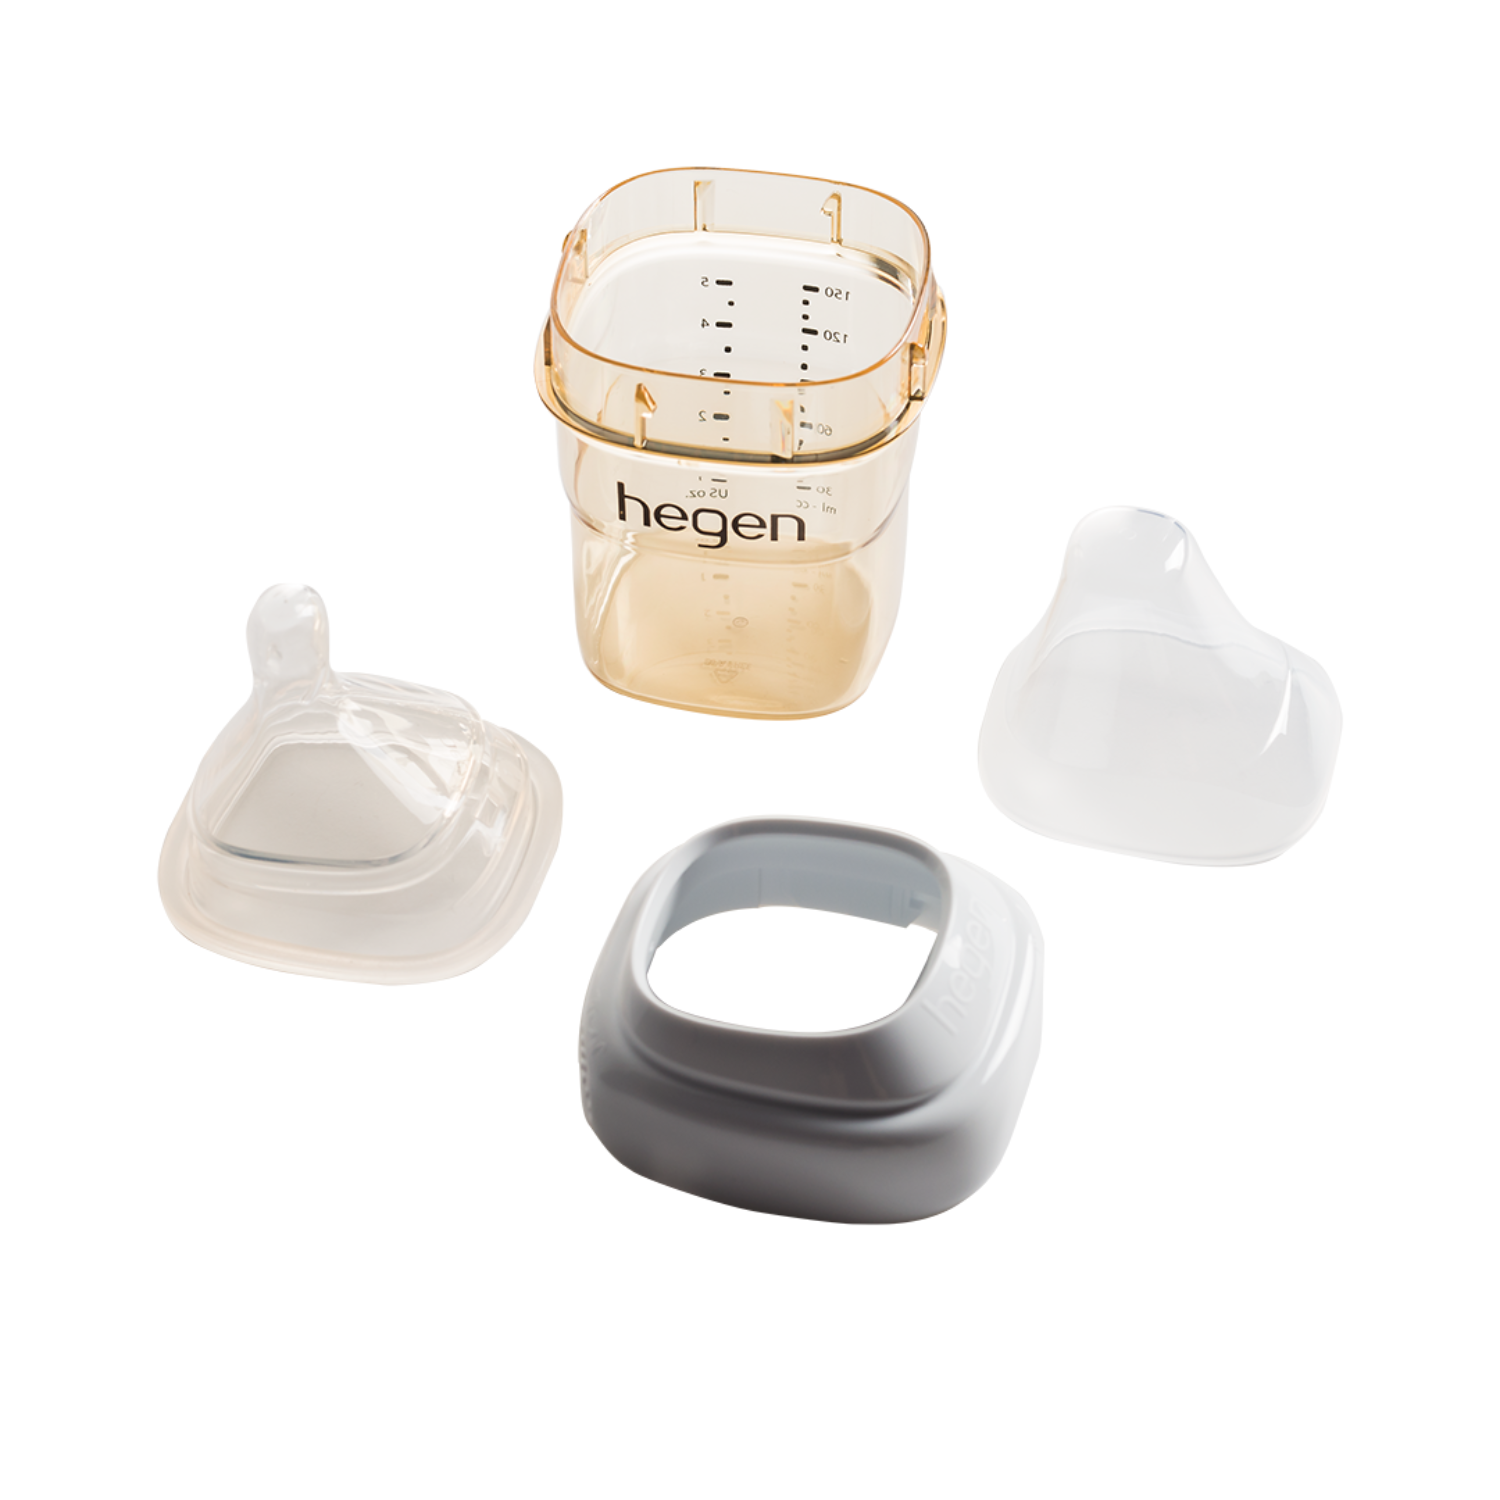 Hegen PCTO™ 150ml/5oz Feeding Bottle PPSU 2-Pack with 2 x Slow Flow Teat (1 to 3 months)